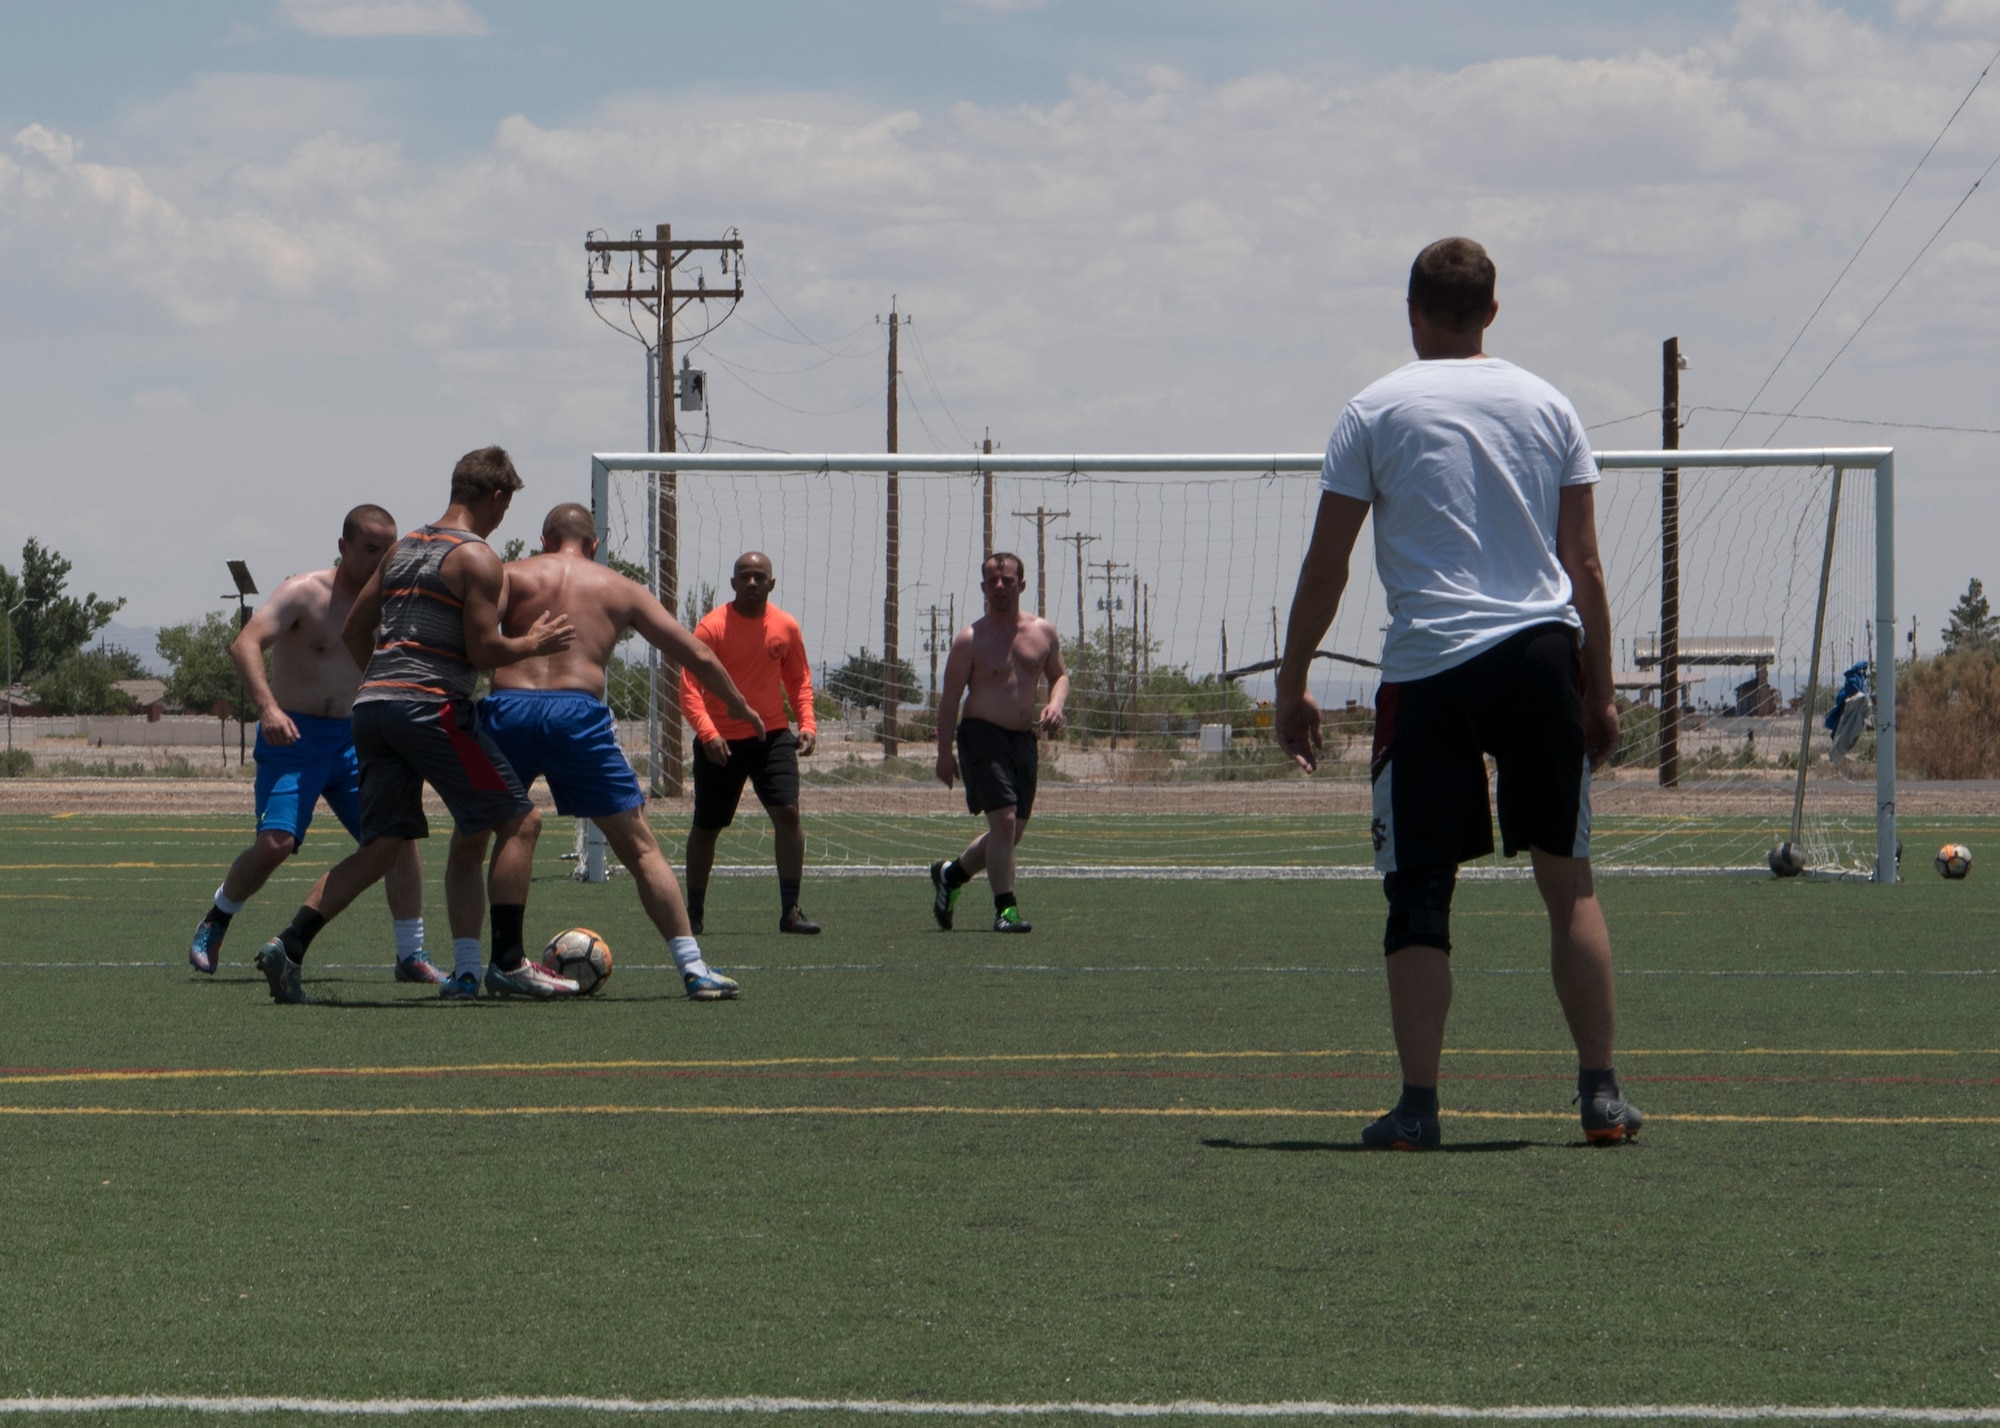 The Holloman Air Force Base Varsity Soccer team moves the goal to have a half-field practice June 10 at the base soccer field. It was Col. Paul Brezinski’s last practice before his brain surgery June 13 and 15 for Parkinson’s Disease. (U.S. Air Force Photo by Airman Autumn Vogt)